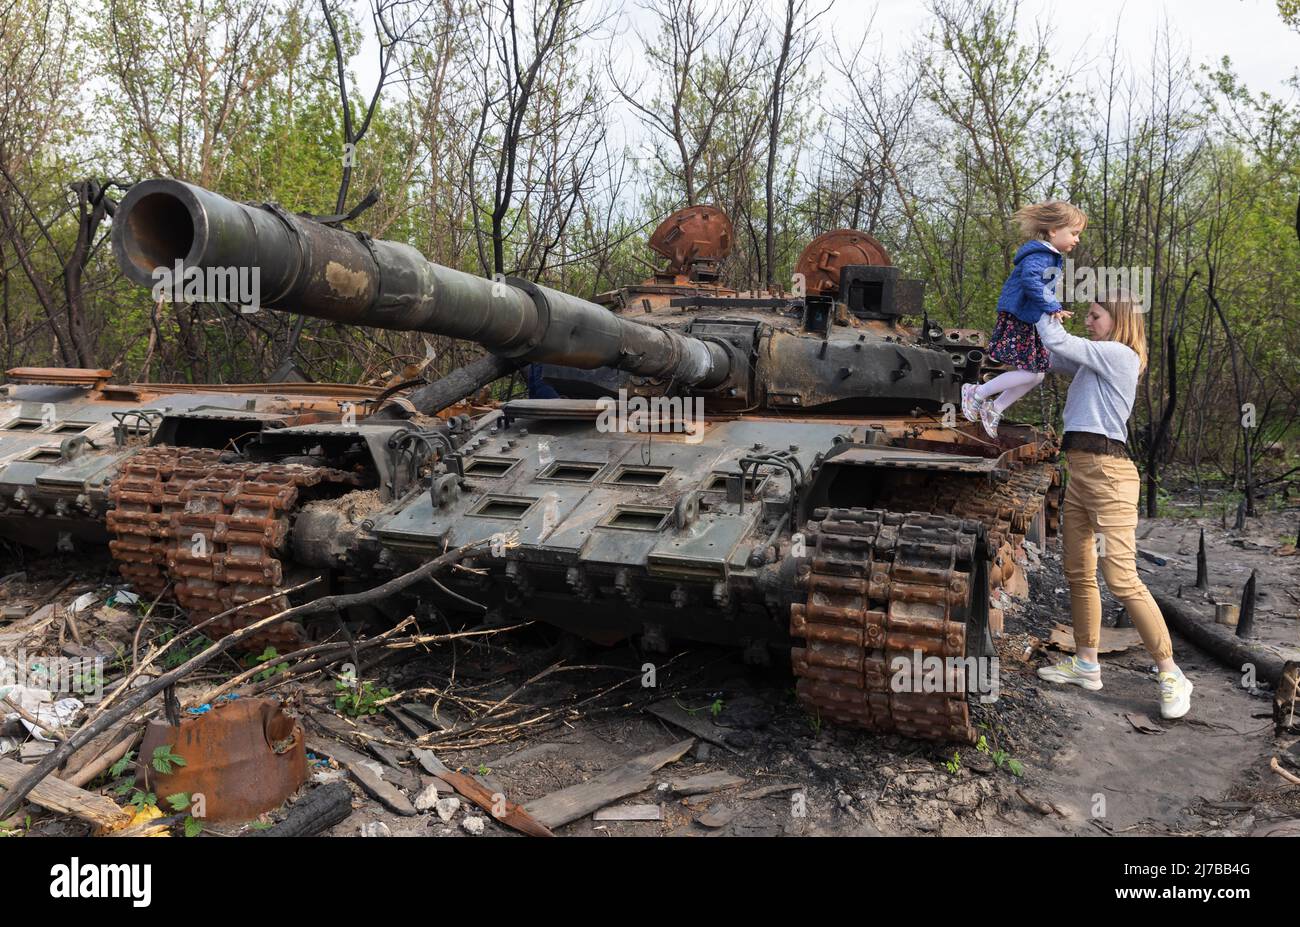 A mother lifts her daughter on the tower of a destroyed Russian tank near Makariv village, Kyiv region. Russia invaded Ukraine on 24 February 2022, triggering the largest military attack in Europe since World War II. Stock Photo